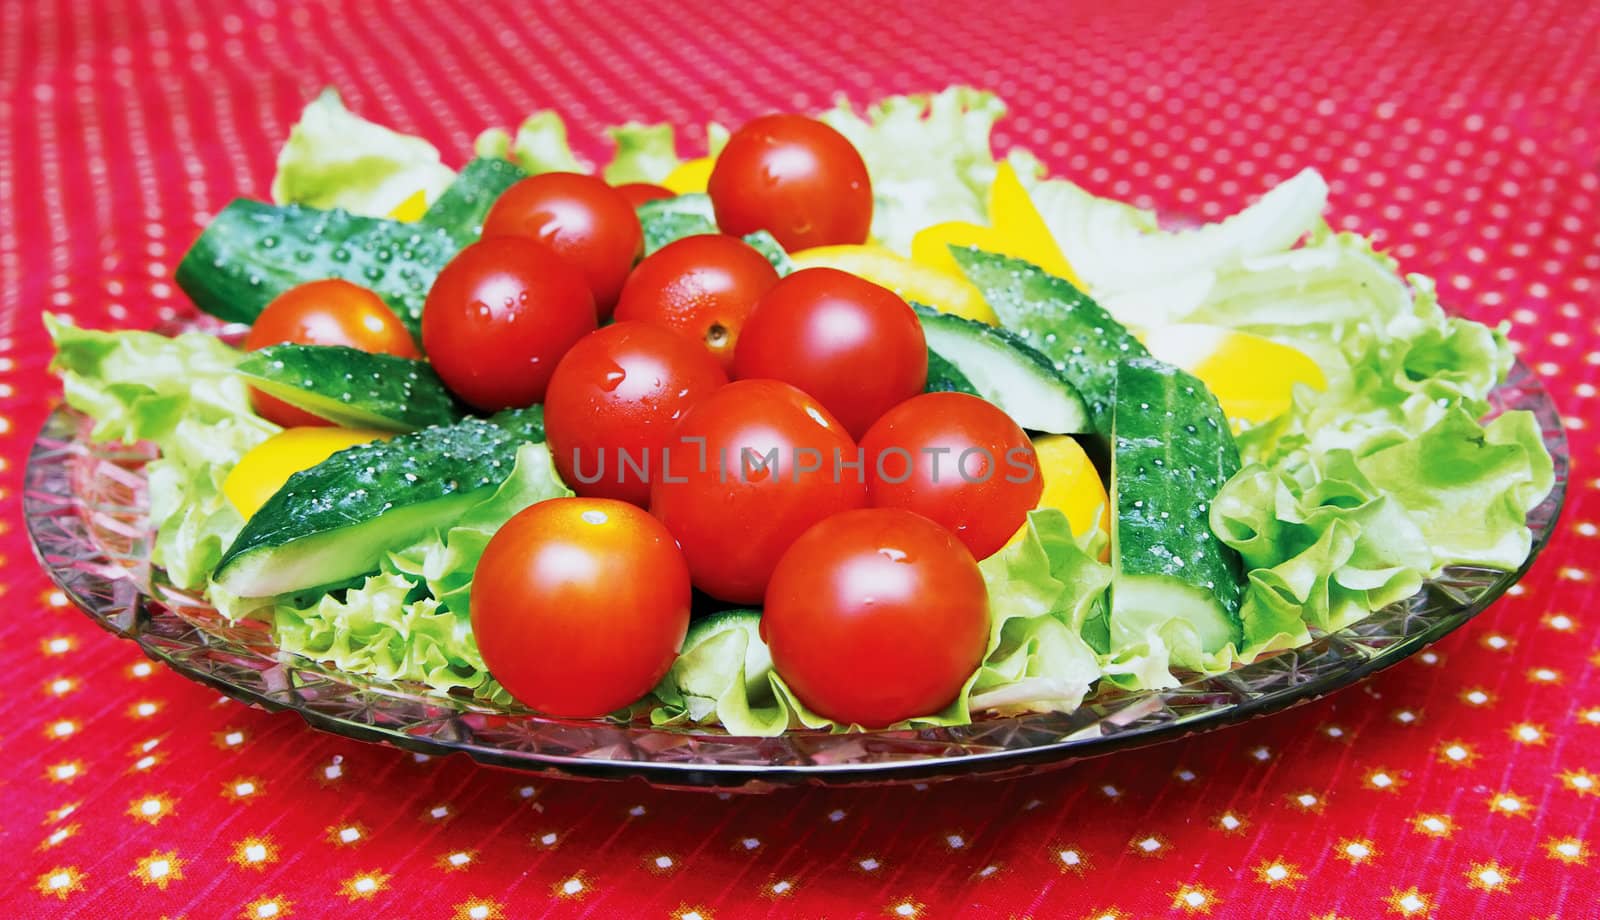 Dish with the expansion of its tomatoes, cucumbers, peppers and lettuce listmi